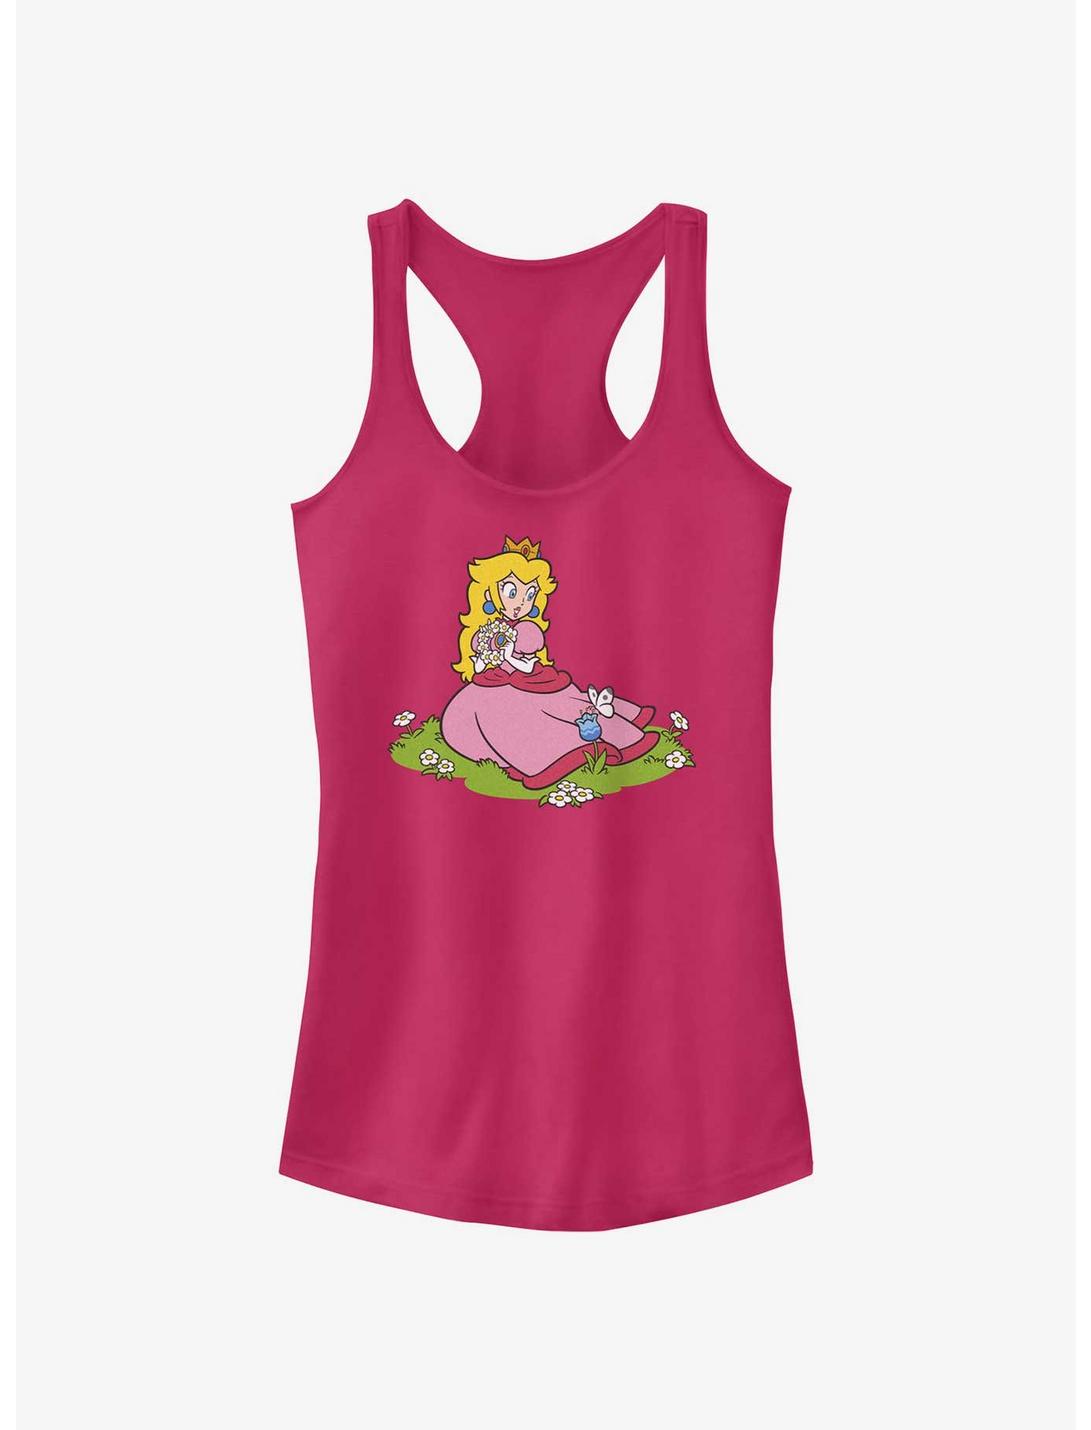 Nintendo Peach And A Butterfly Girls Tank, RASPBERRY, hi-res